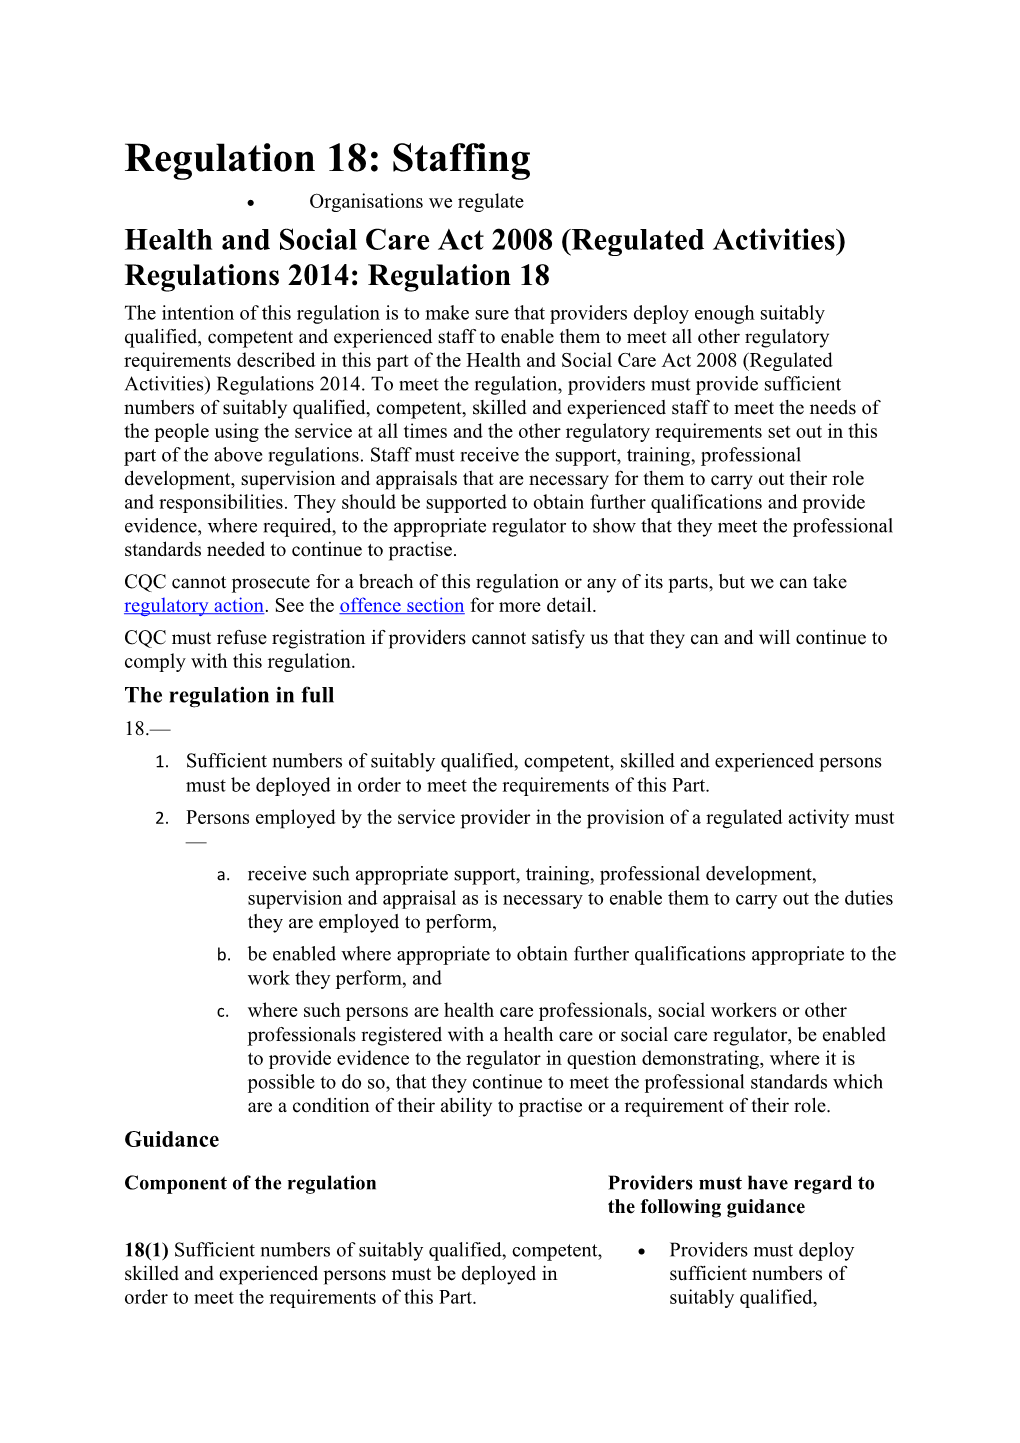 Health and Social Care Act 2008 (Regulated Activities) Regulations 2014: Regulation 18